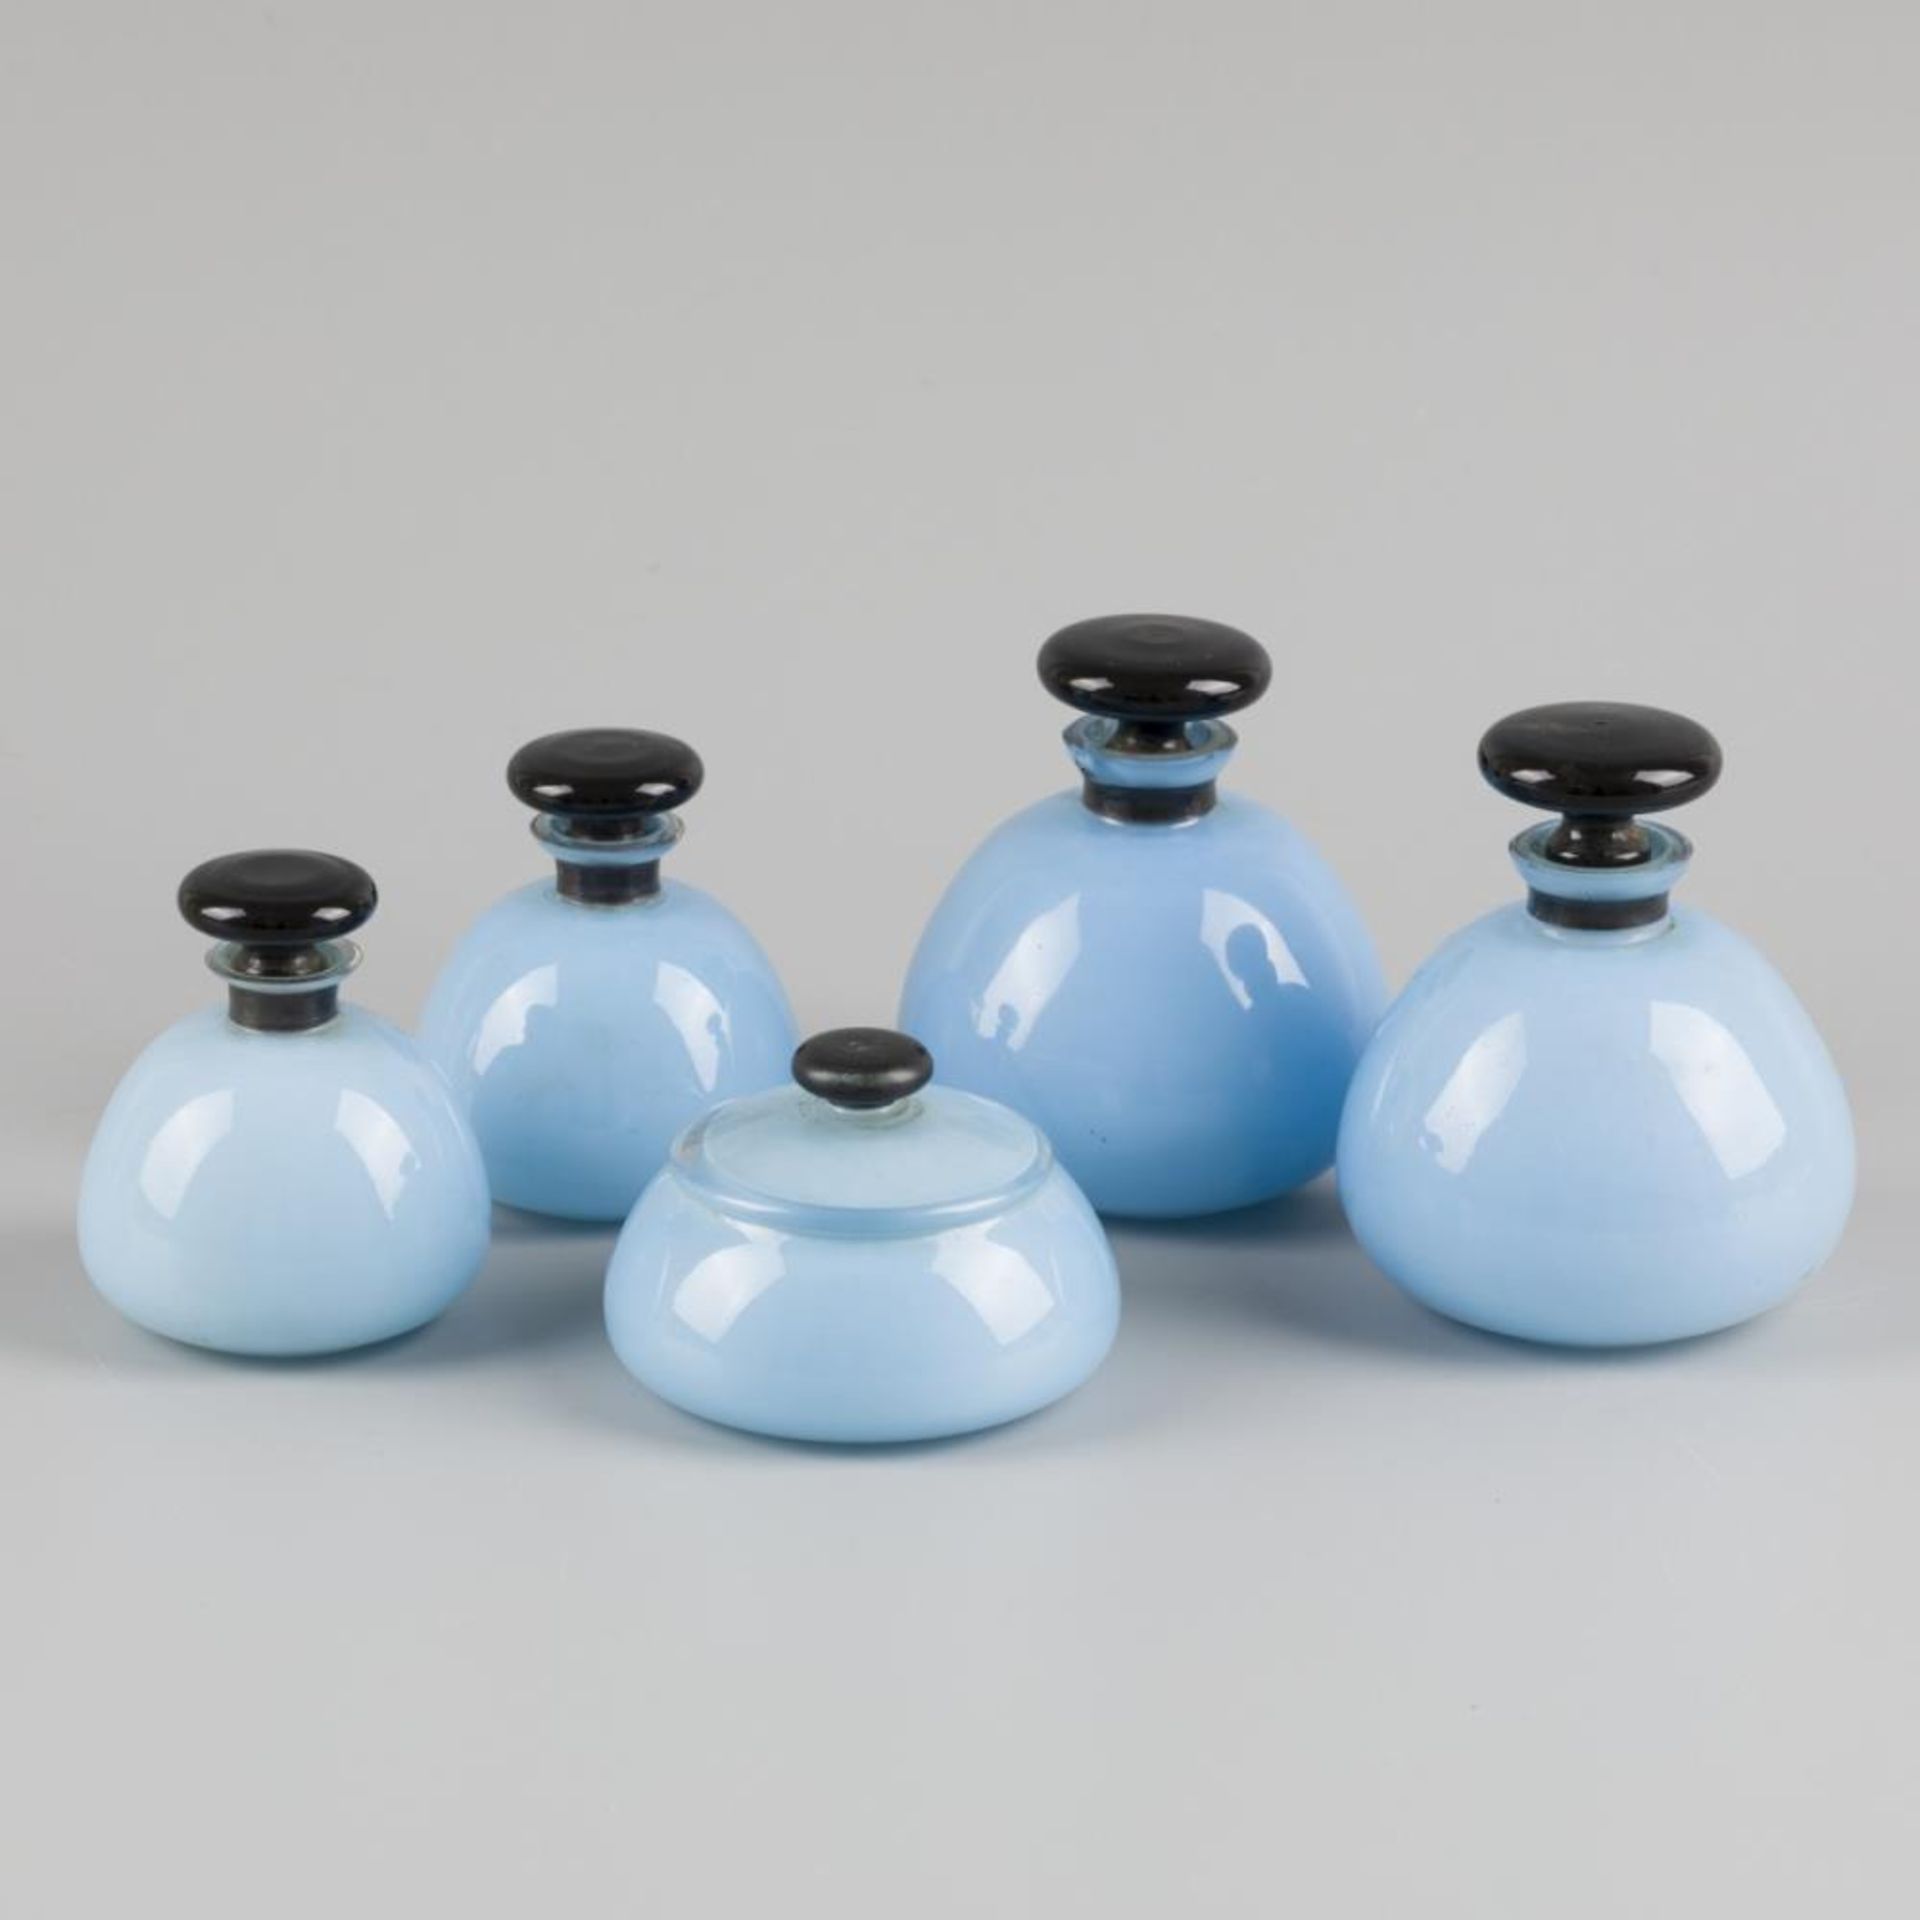 A (5) piece art deco style toiletry set, sky blue glass with black band, Germany, ca. 1920.